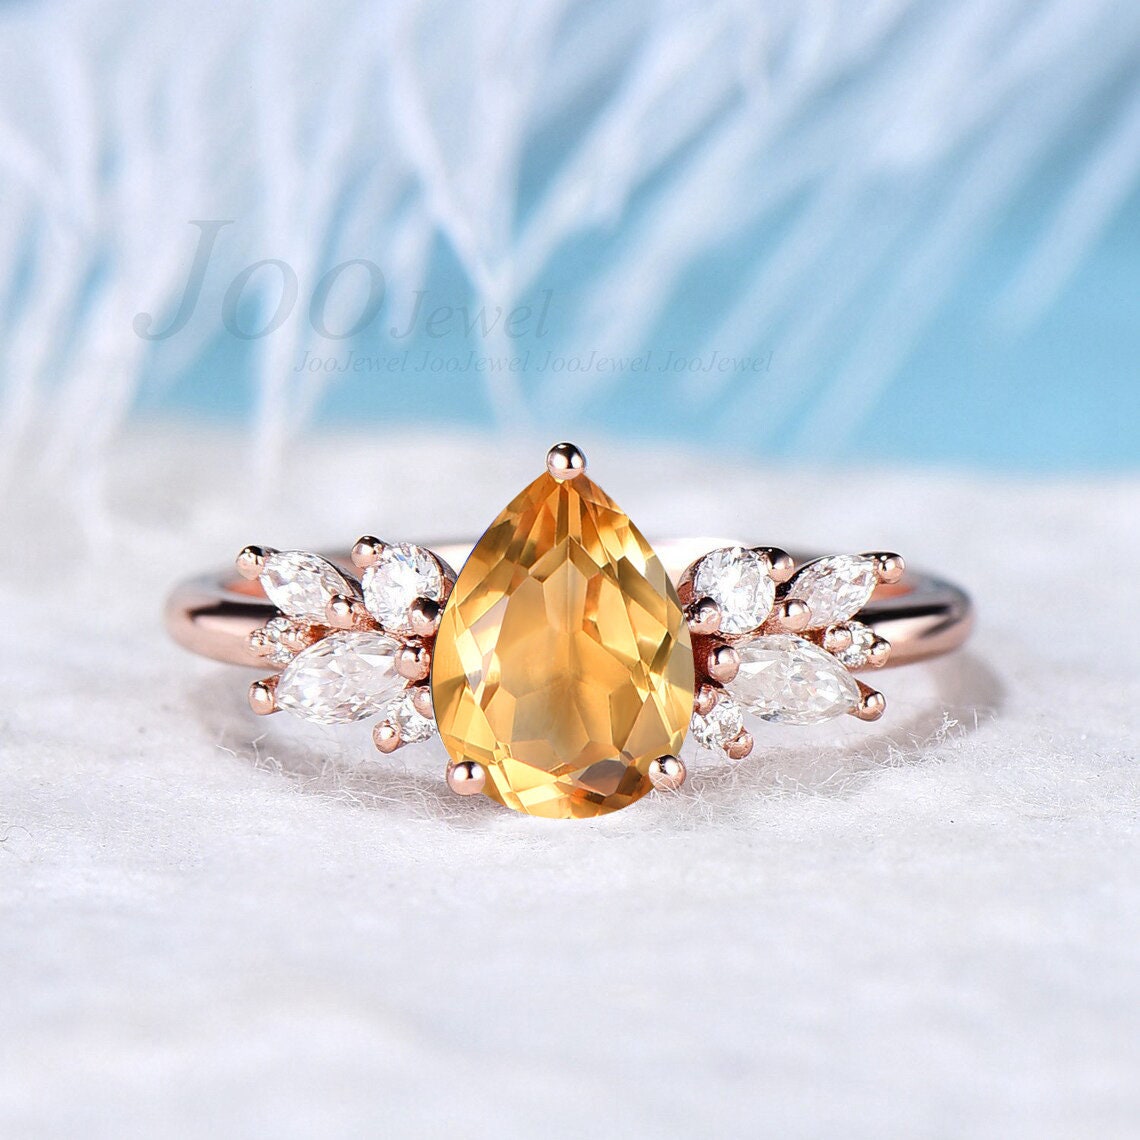 Natural Citrine Ring 1.25ct Pear Shaped Citrine Wedding Ring Sterling Silver Cluster Crystal Engagement Ring November Birthstone Jewelry